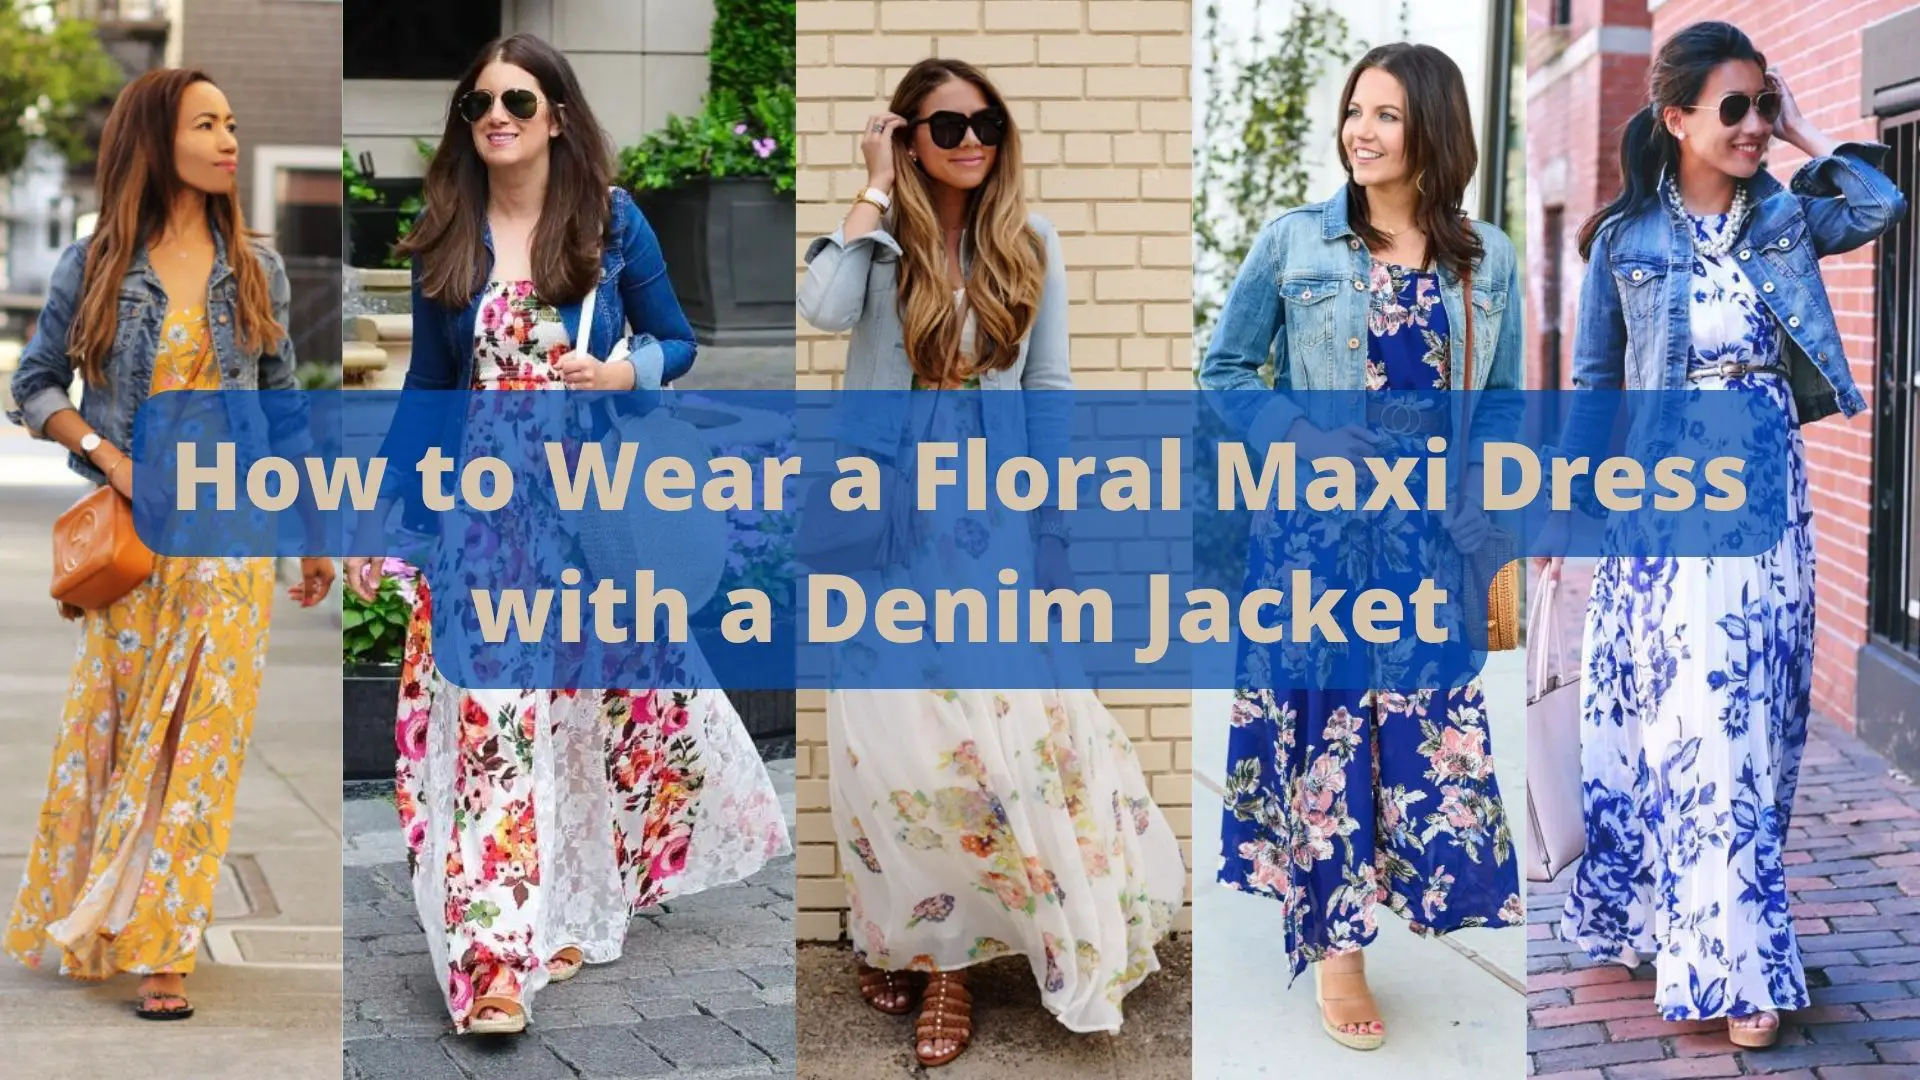 How to Wear a Floral Maxi Dress with a Denim Jacket